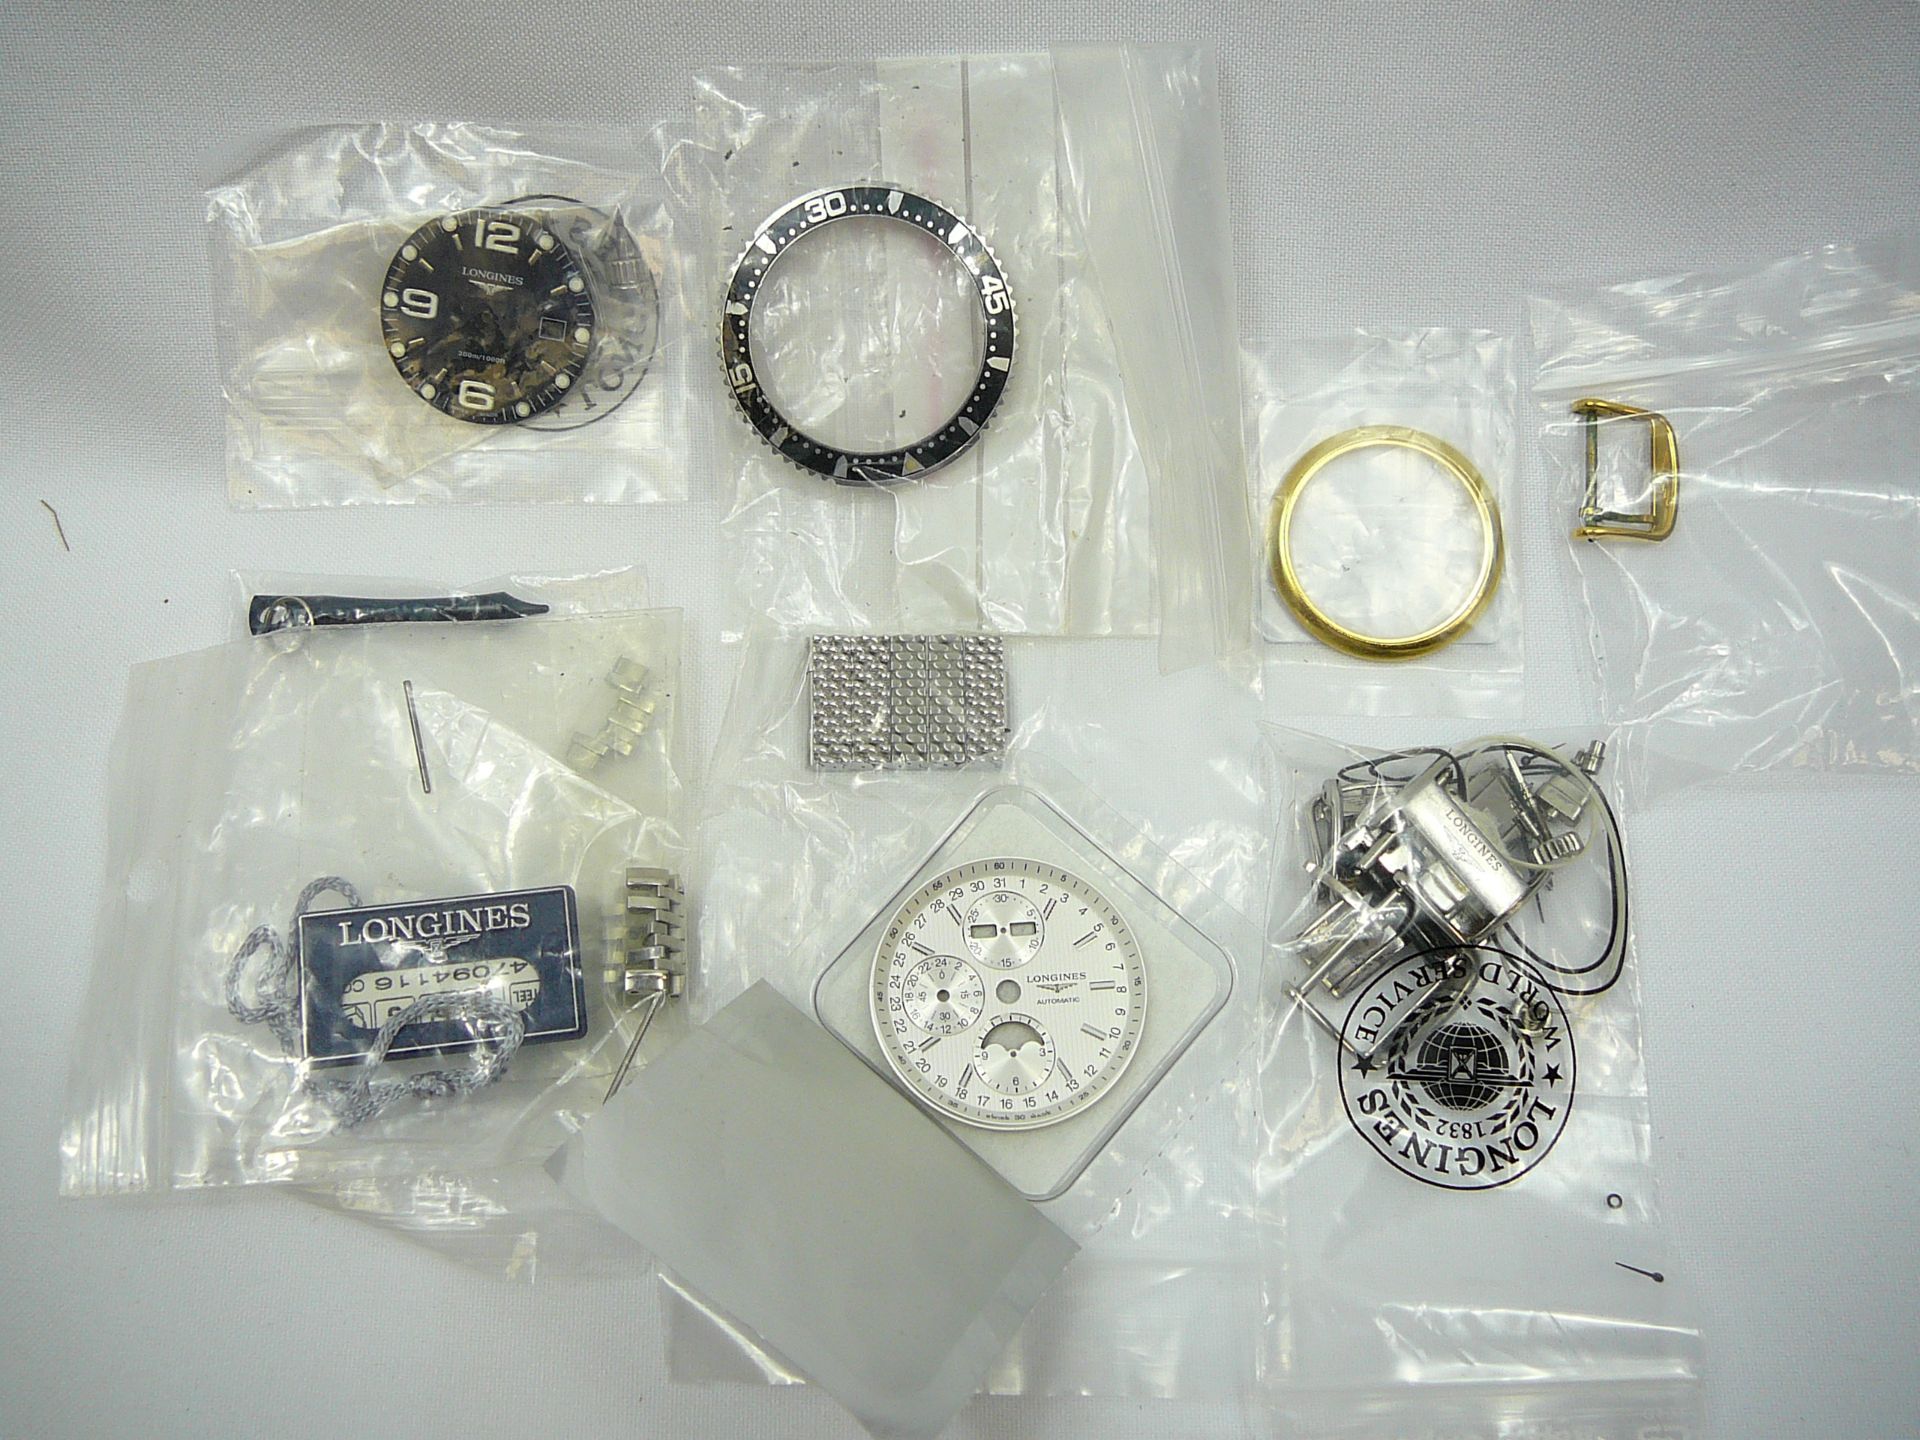 Assd Longines watch components